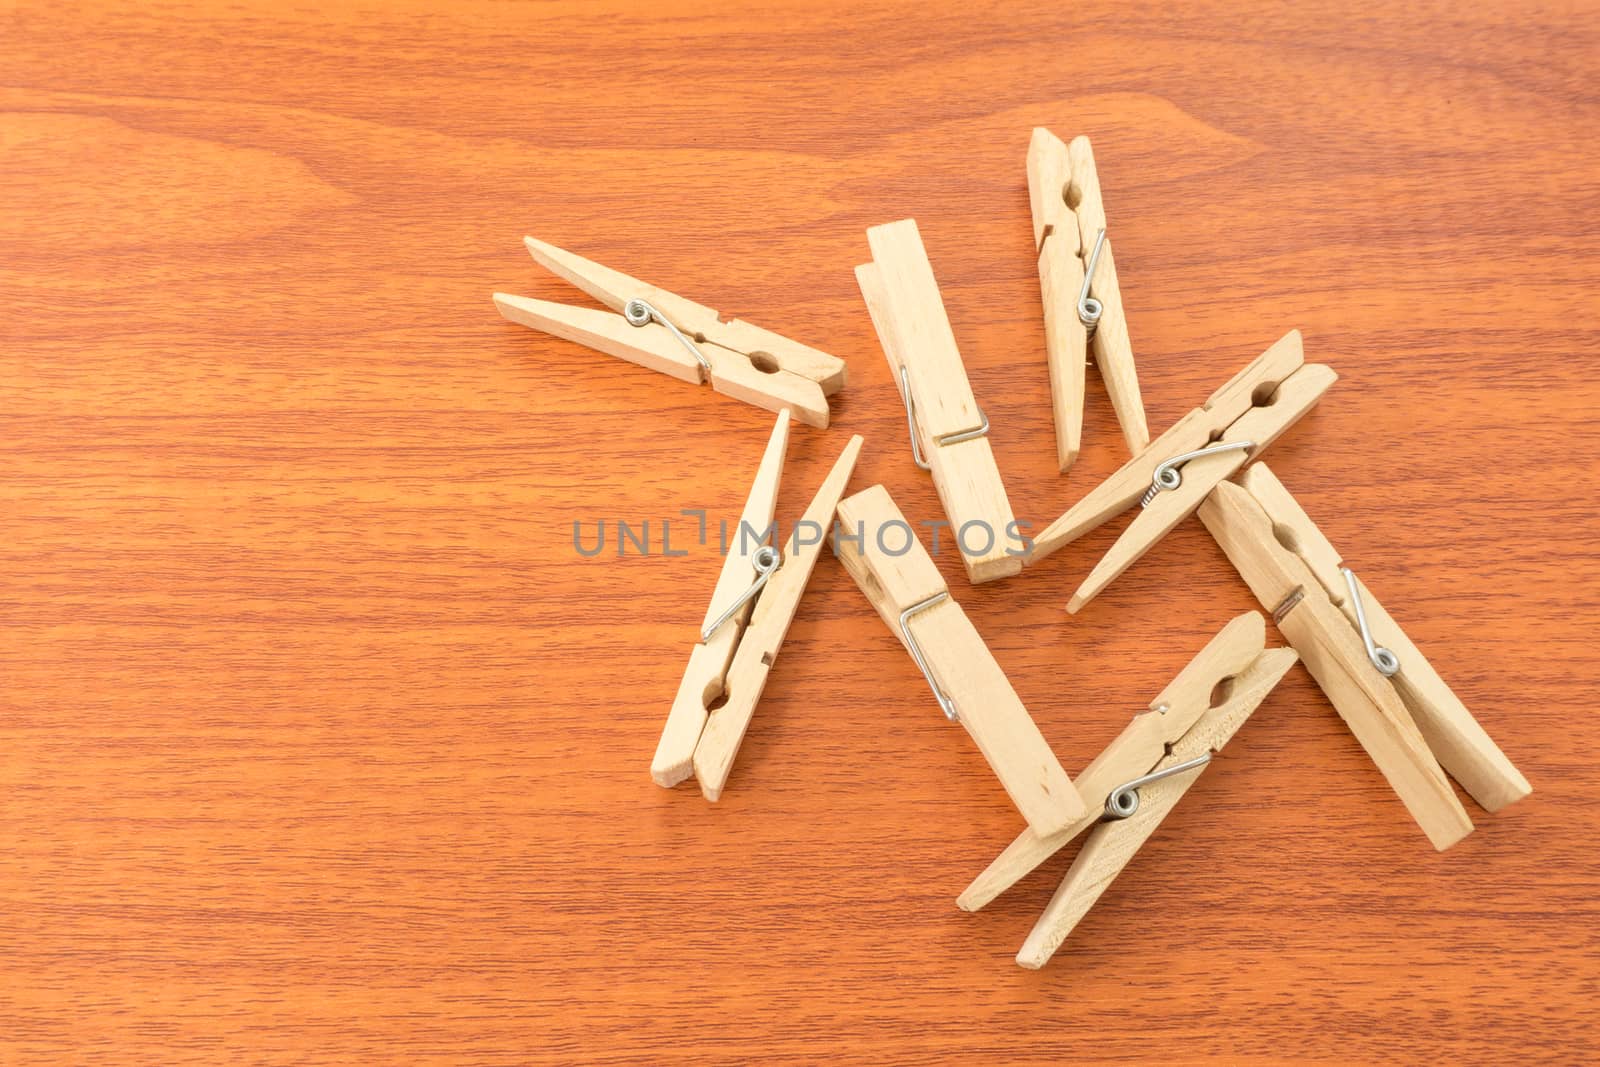 Mix Wood Clothespins on Red Wood Surface by ekgapark